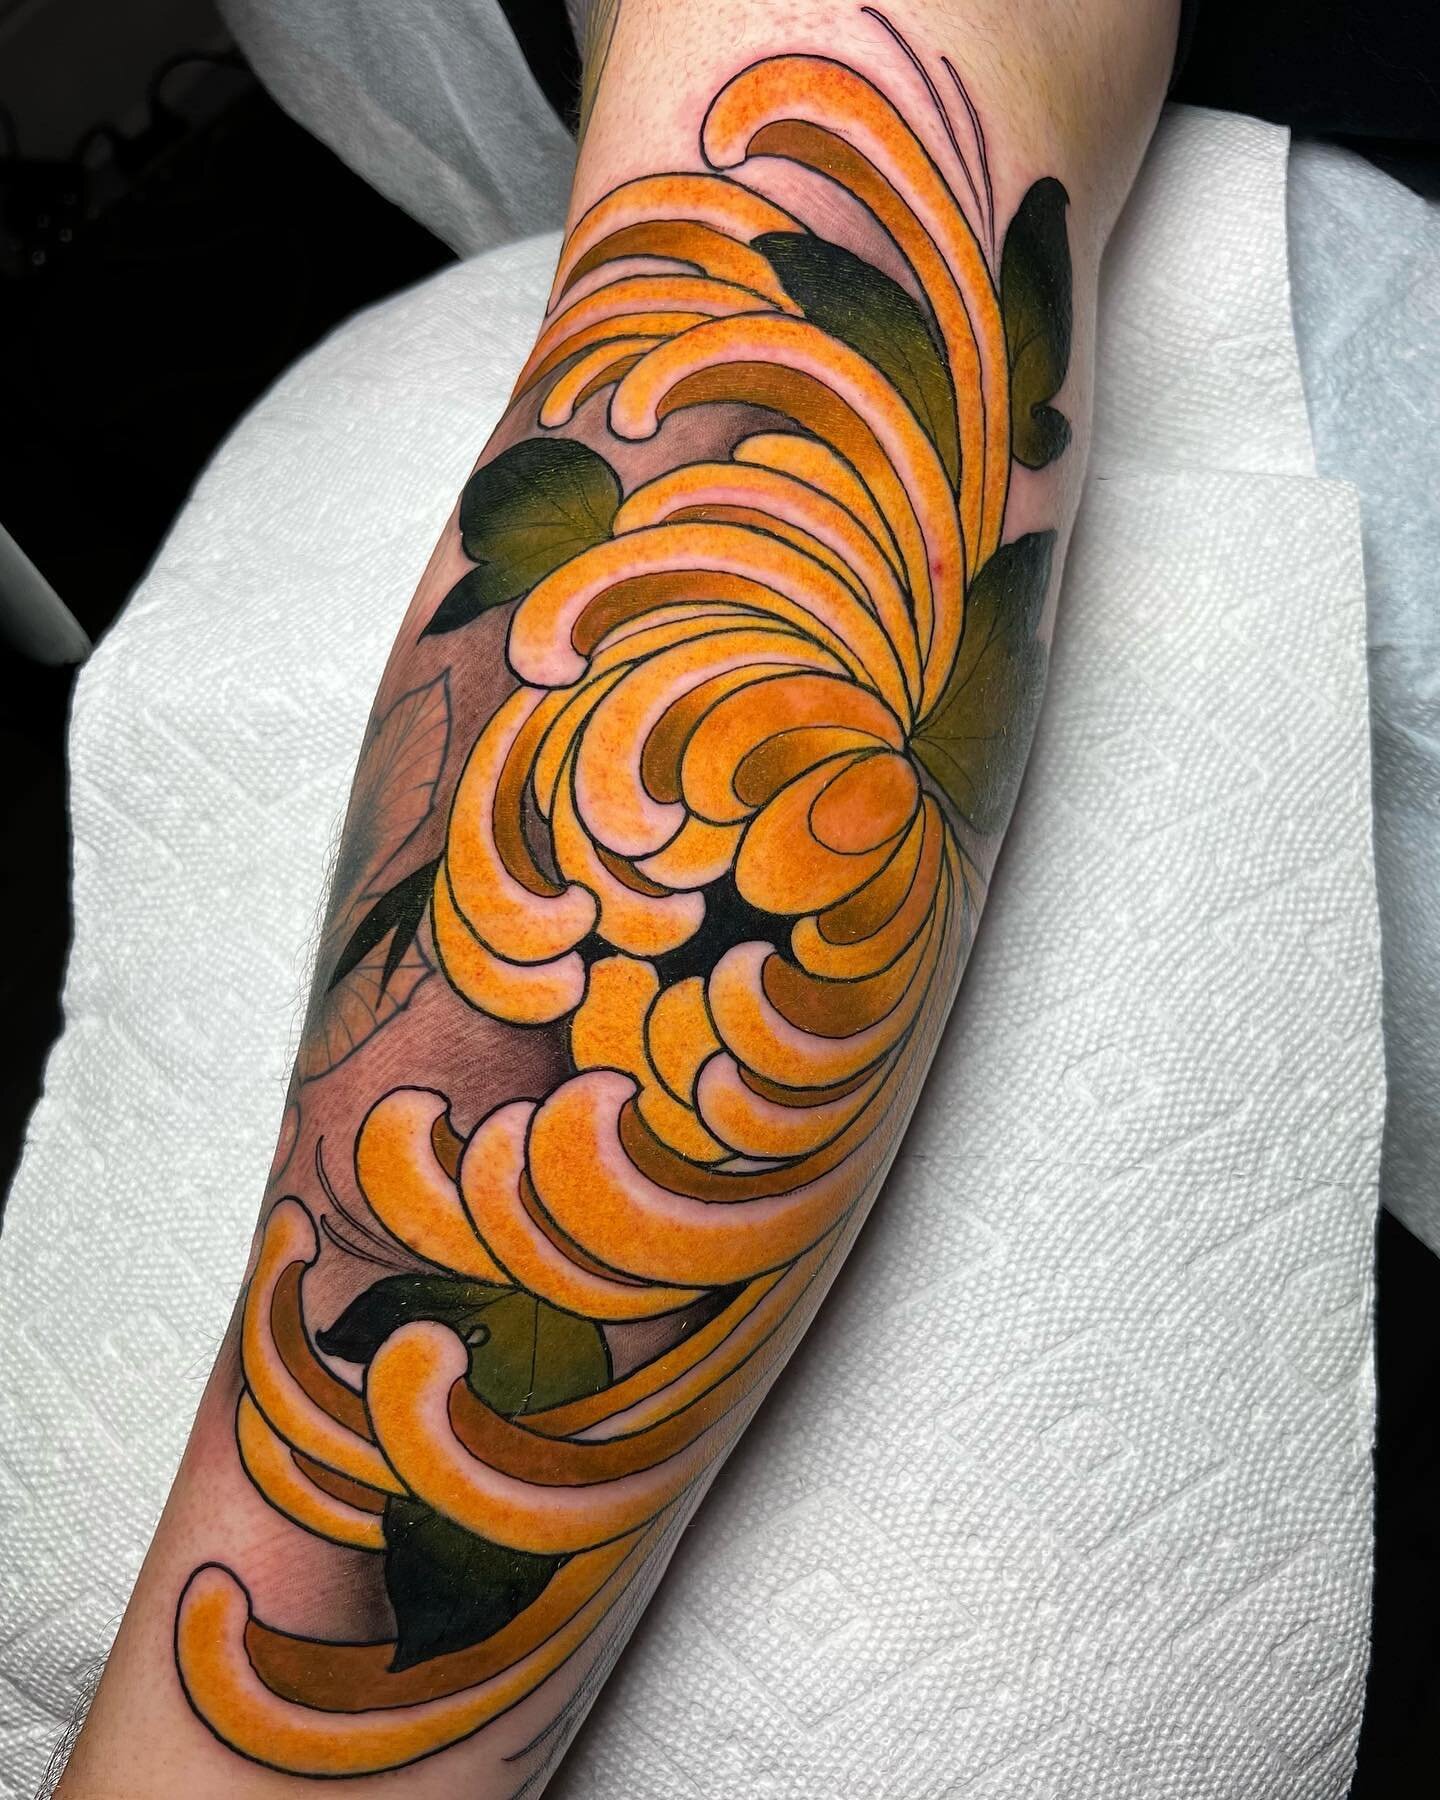 Golden mums time of year! Go get your mom some mums!!.

.
.
.
.
.
#neotrad #neotradi #neotradeu #ntgallery #mumtattoo #neotradtattoo #neotradworkers #neotradwork #tattooworkers #neotradsub #neotraditionaltattooers #neotradstyle #neotradworldwide #neo